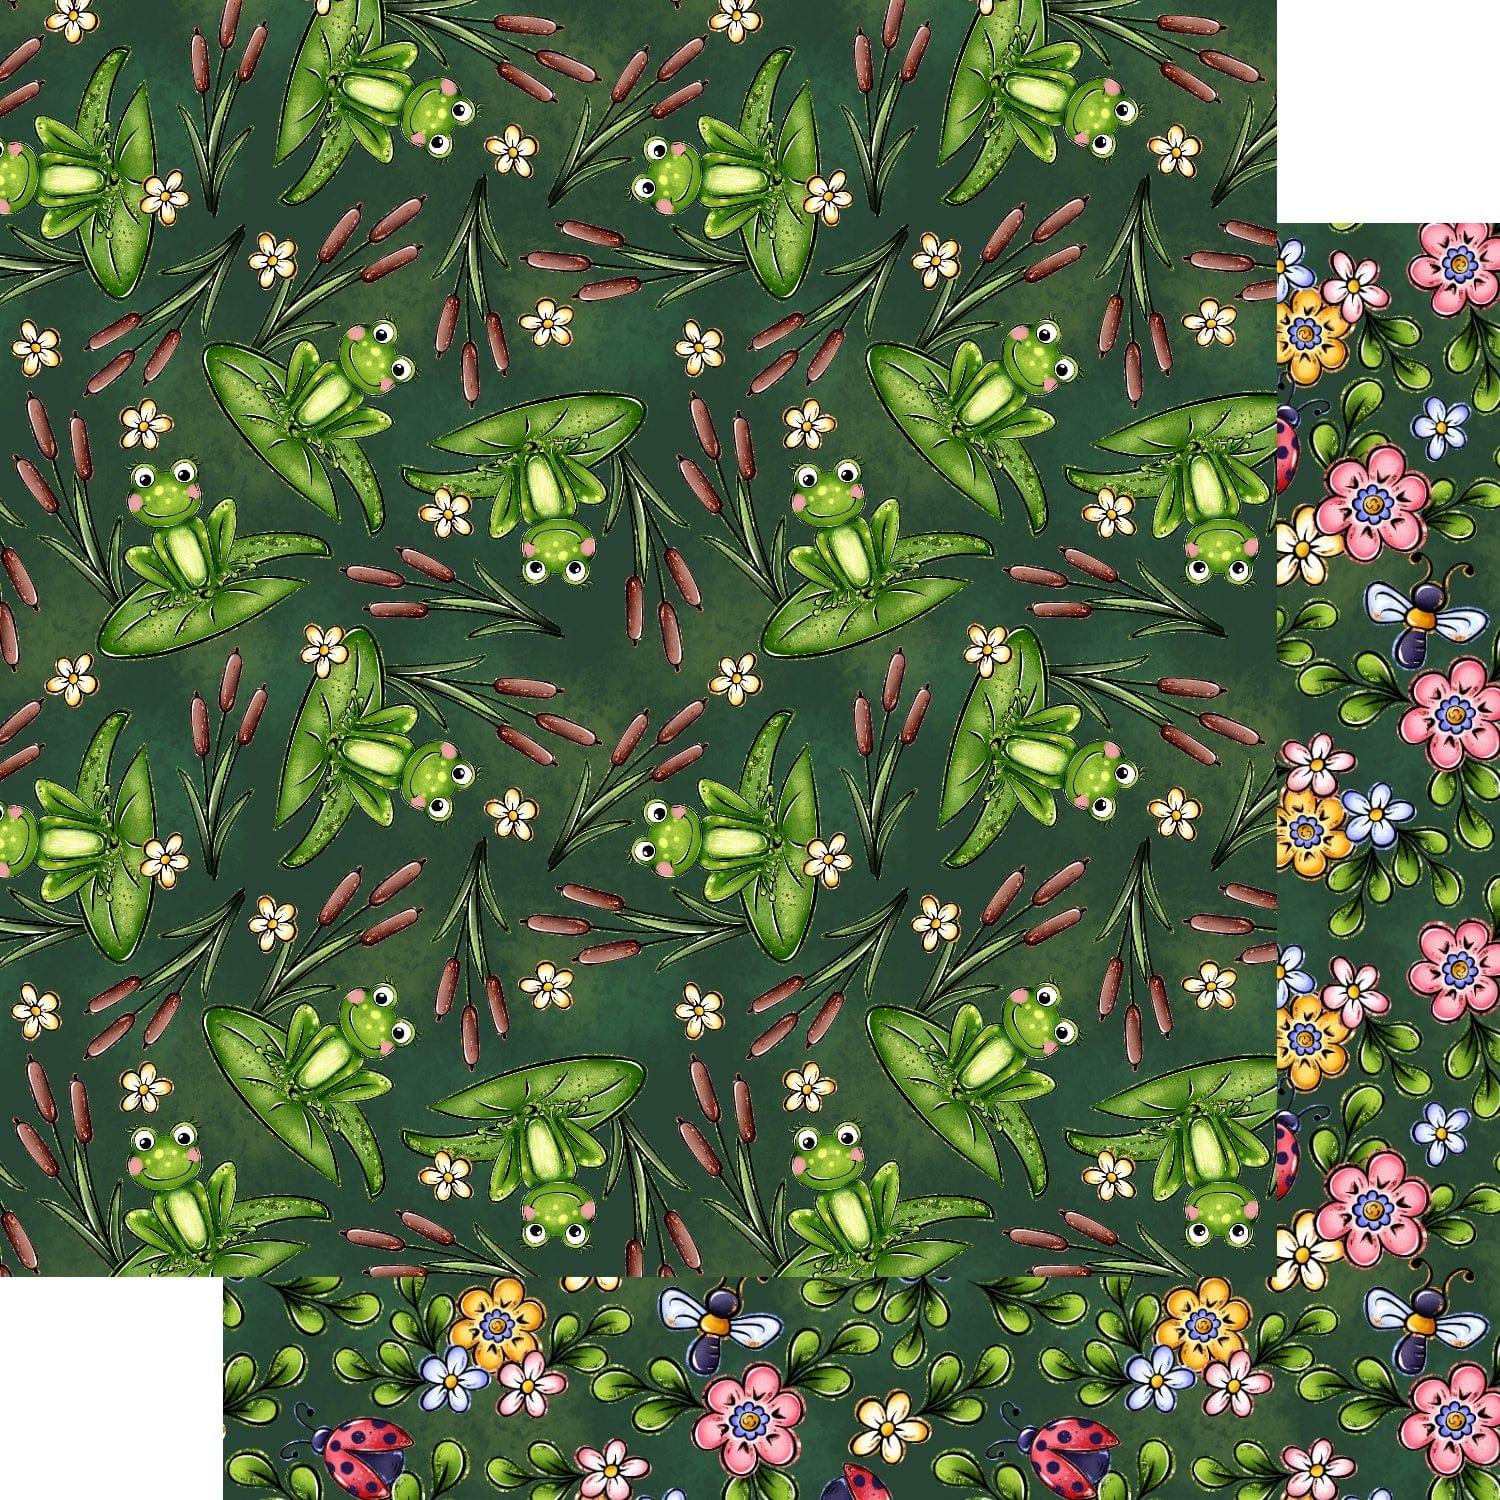  Frogs In The Morass Collection Frogs & Cattails 12 x 12 Double-Sided Scrapbook Paper by SSC Designs - Scrapbook Supply Companies